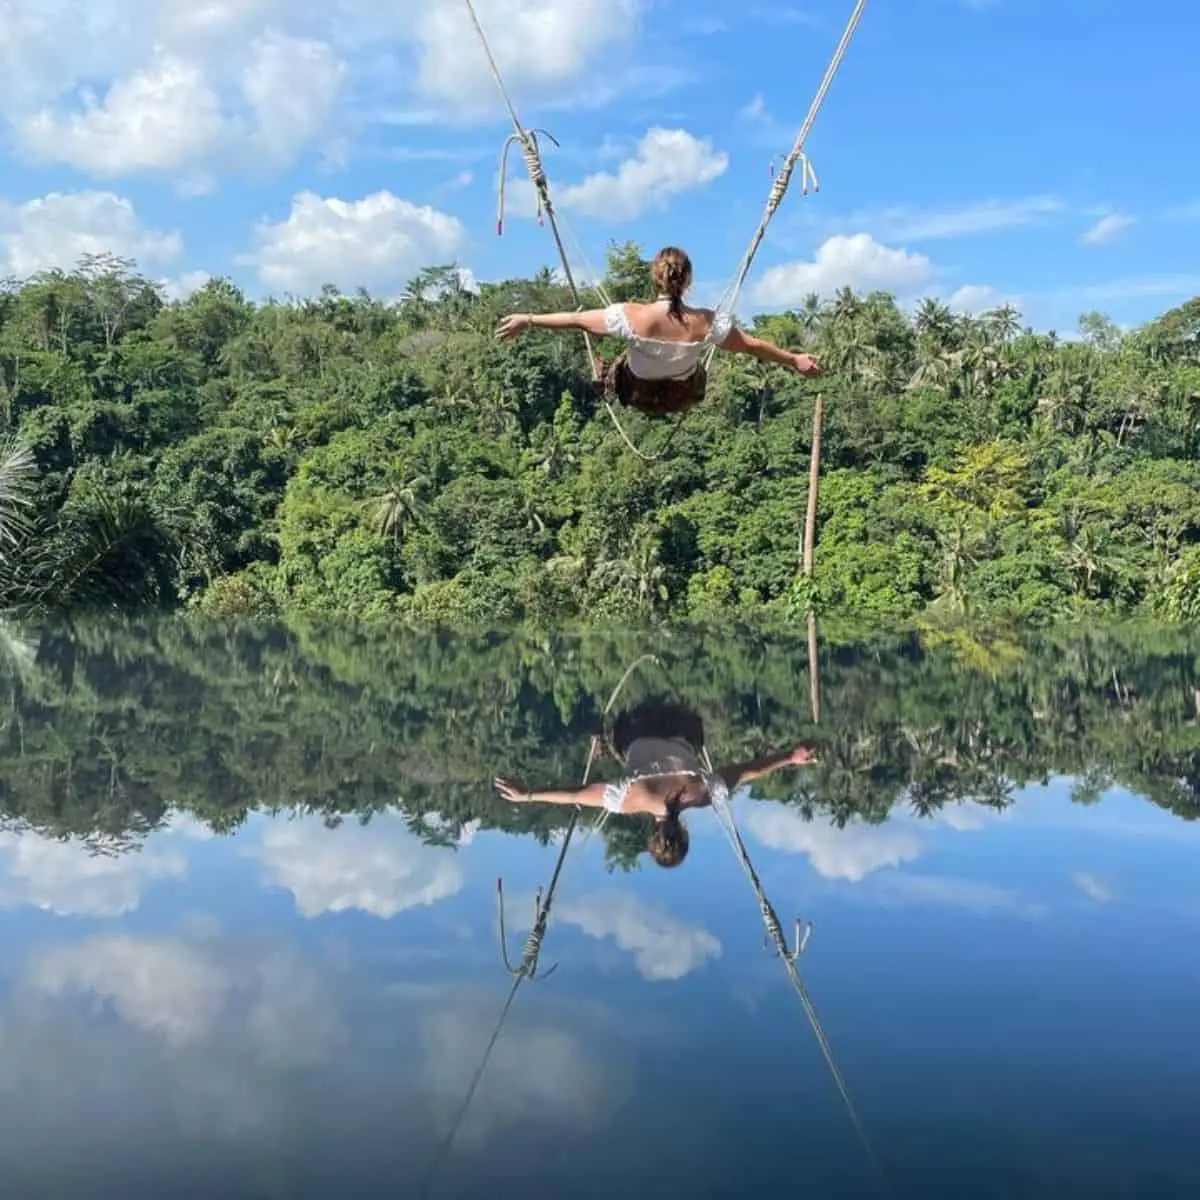 Bali Sky Swing enjoyed by a woman with river waters underneath